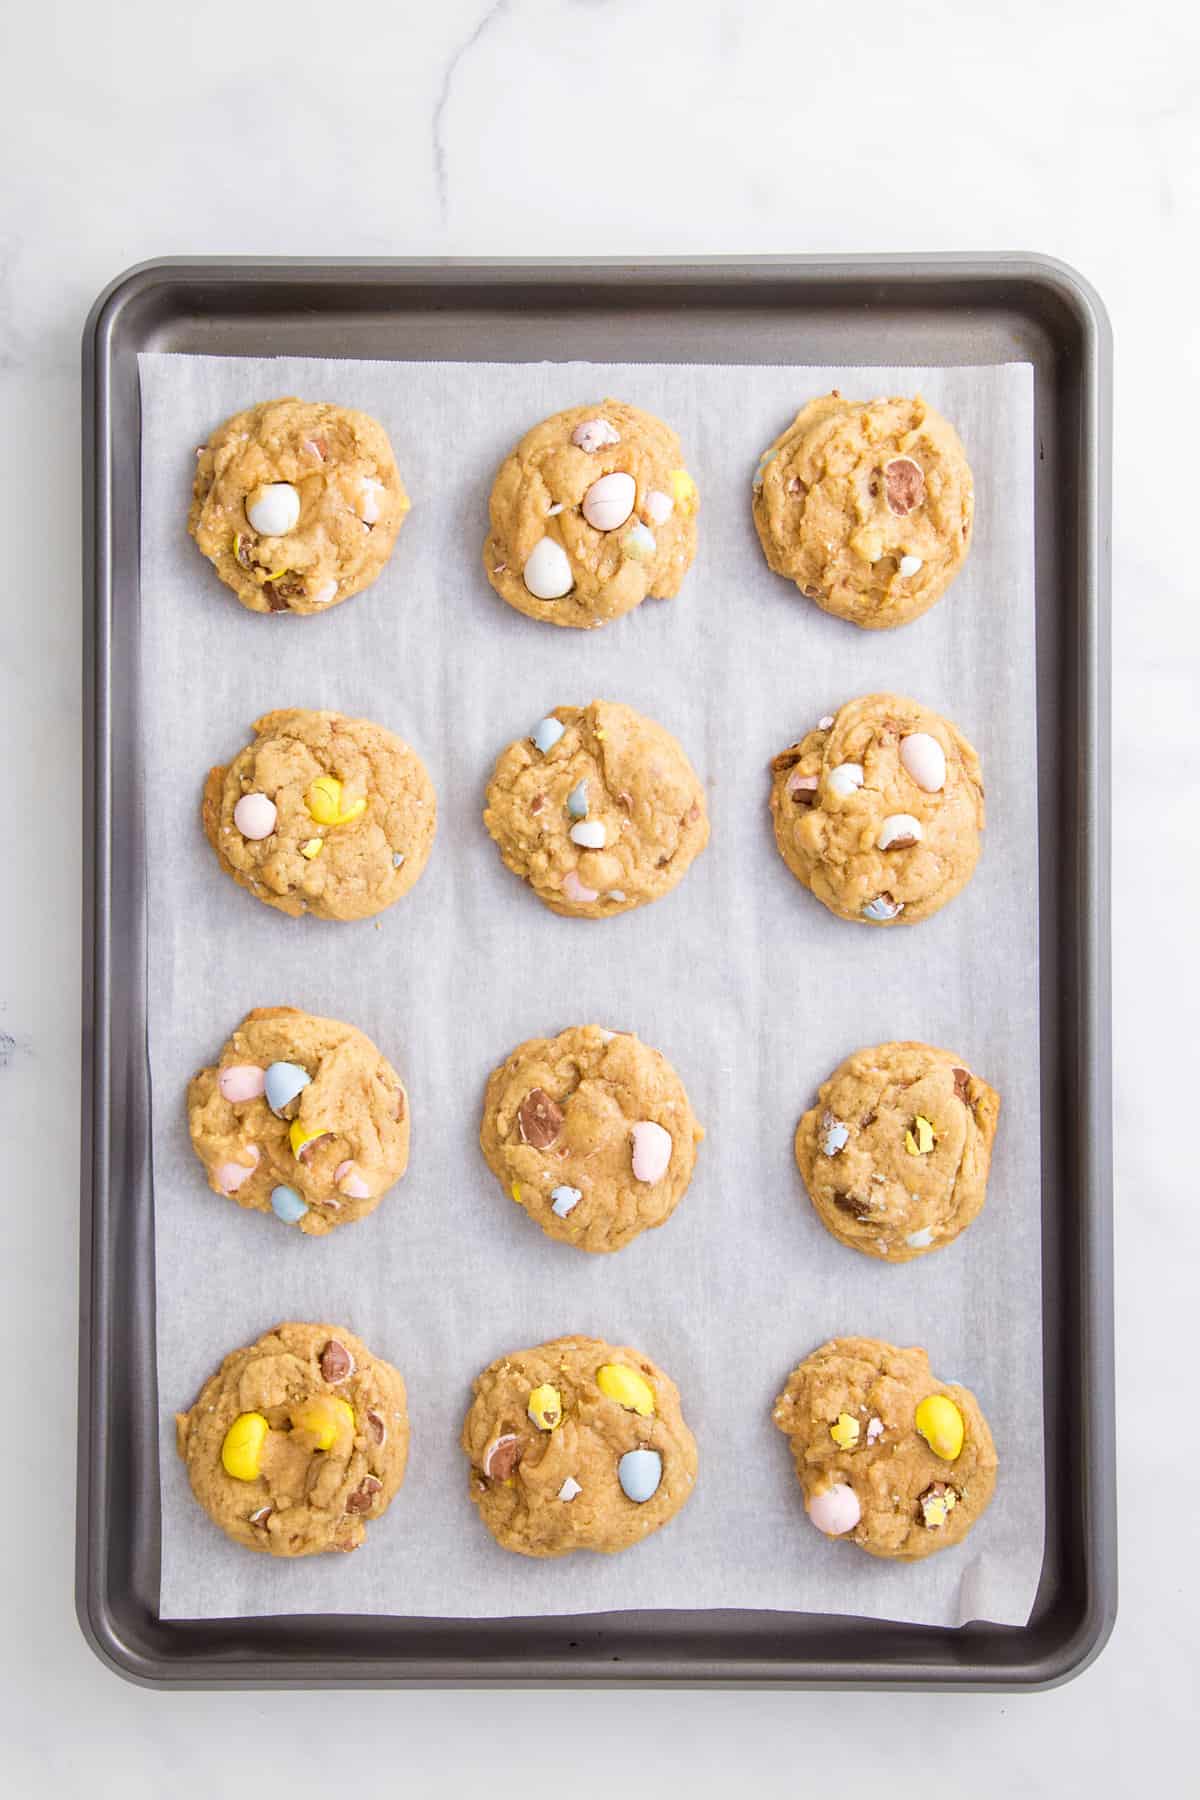 12 baked cadbury egg cookie dough arranged on a parchment lined baking sheet